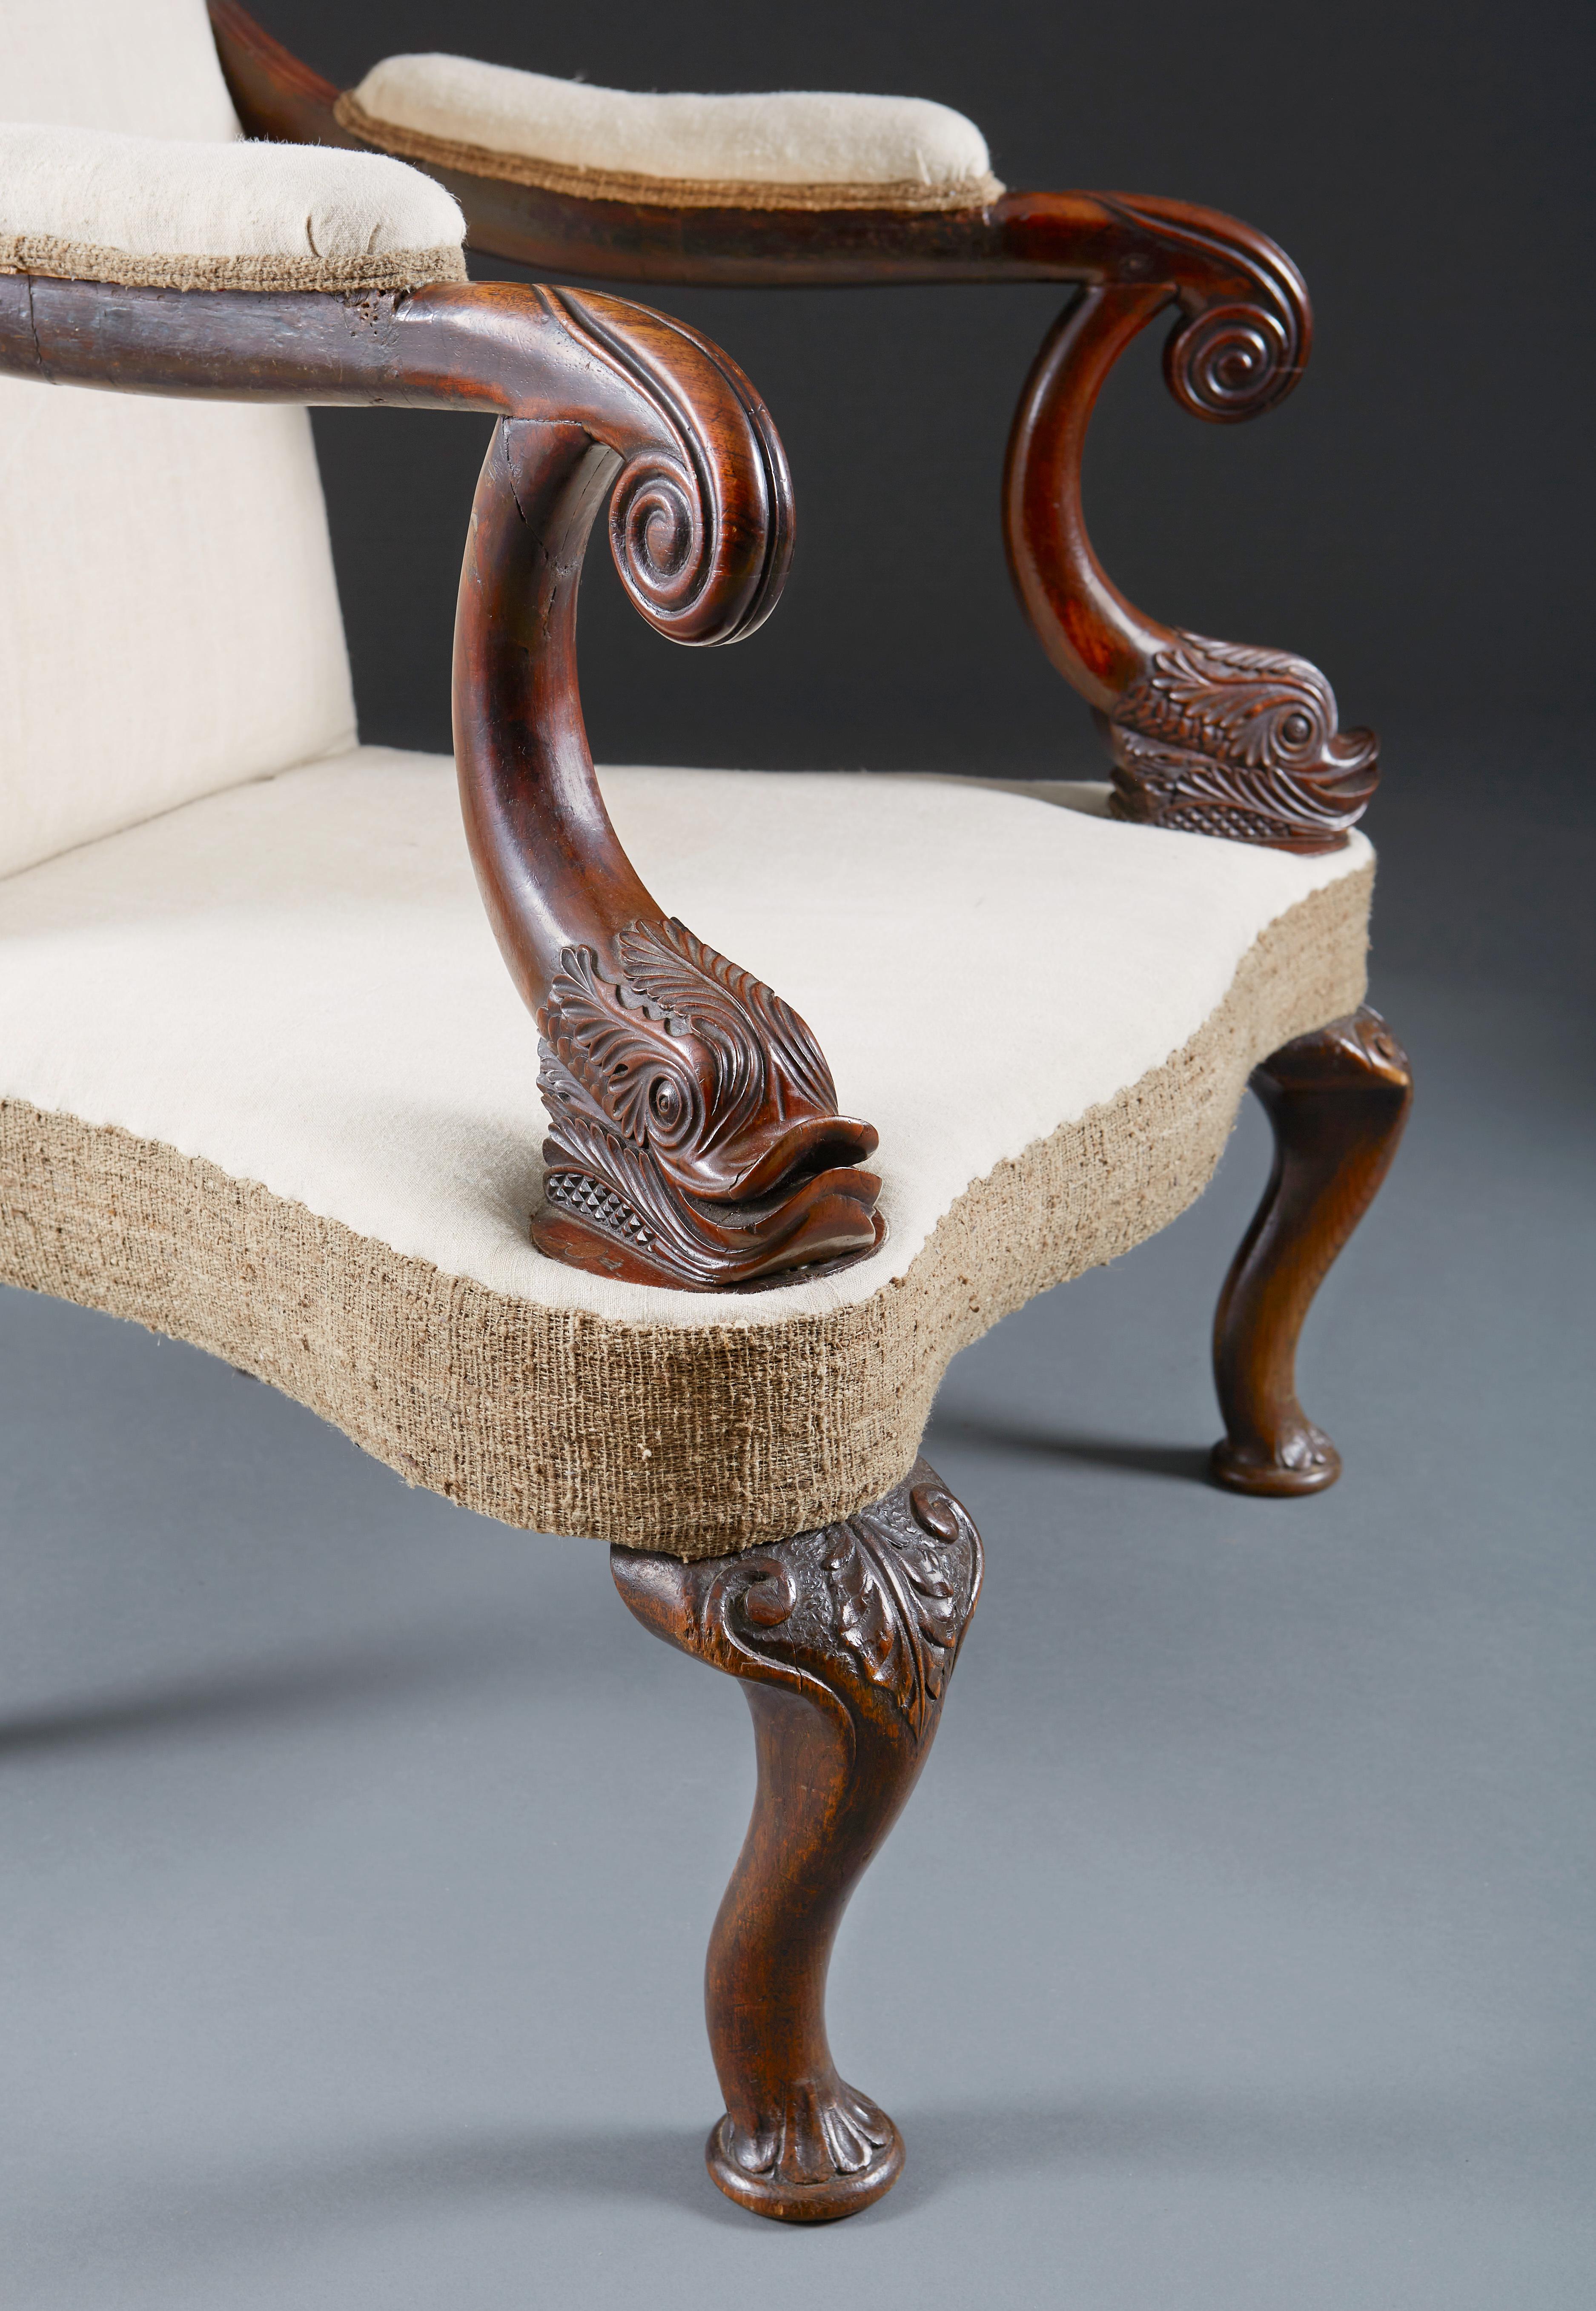 A fine mid-19th century walnut library armchair with wing back and unusual dolphin carving to the arms, all supported on cabriole legs. Recently upholstered to calico with tufts.